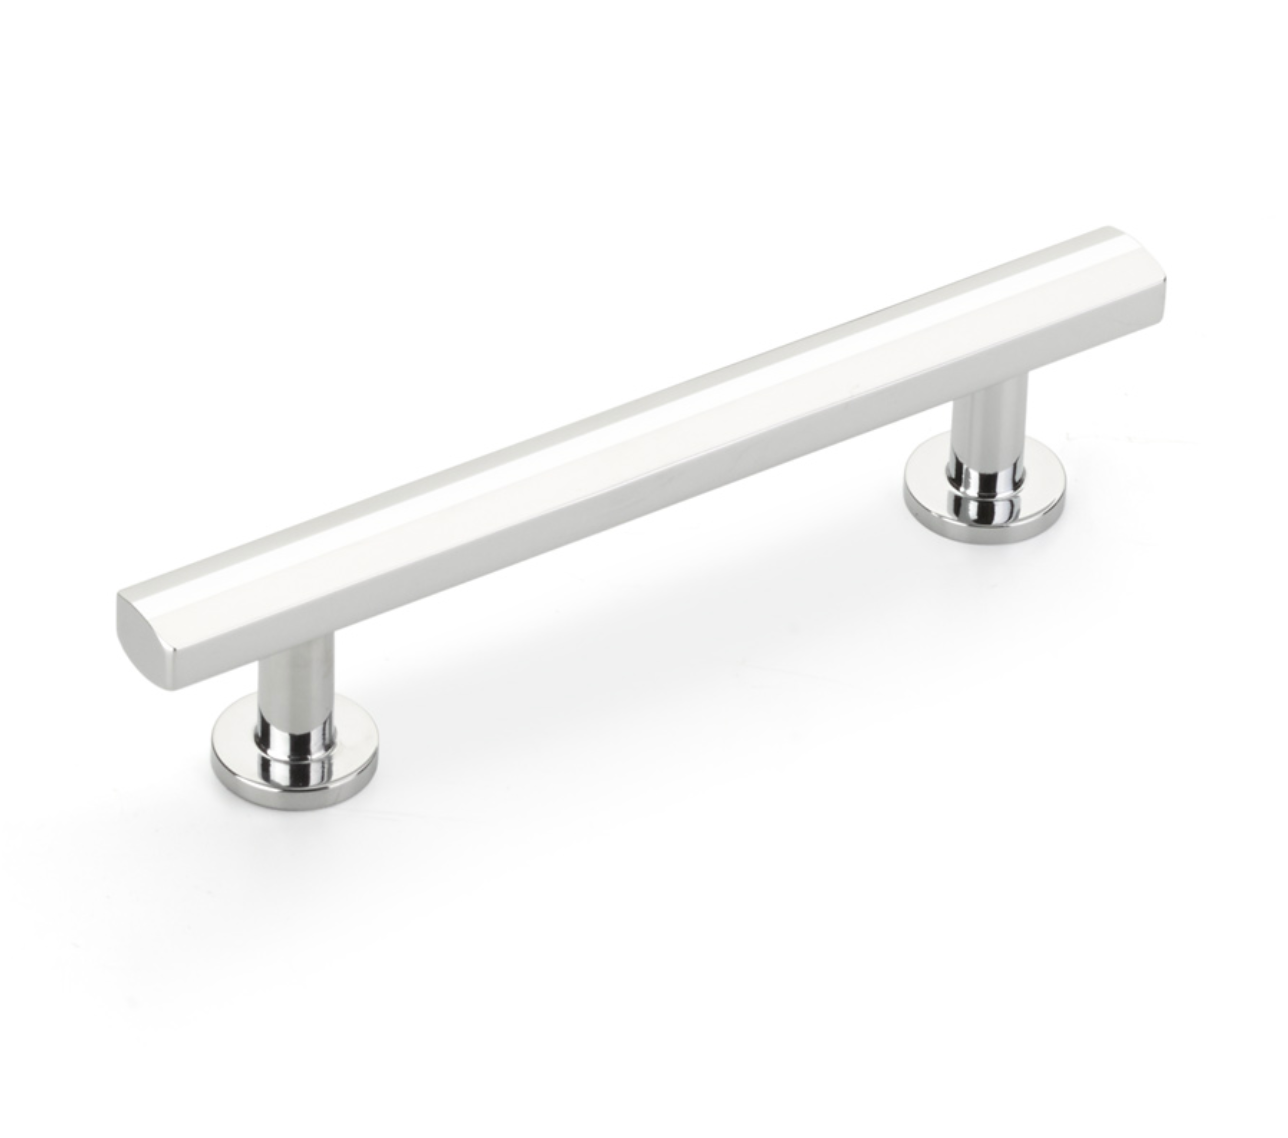 Polished Chrome "Heather" T-Bar Cabinet Knobs and Drawer Pulls - Industry Hardware